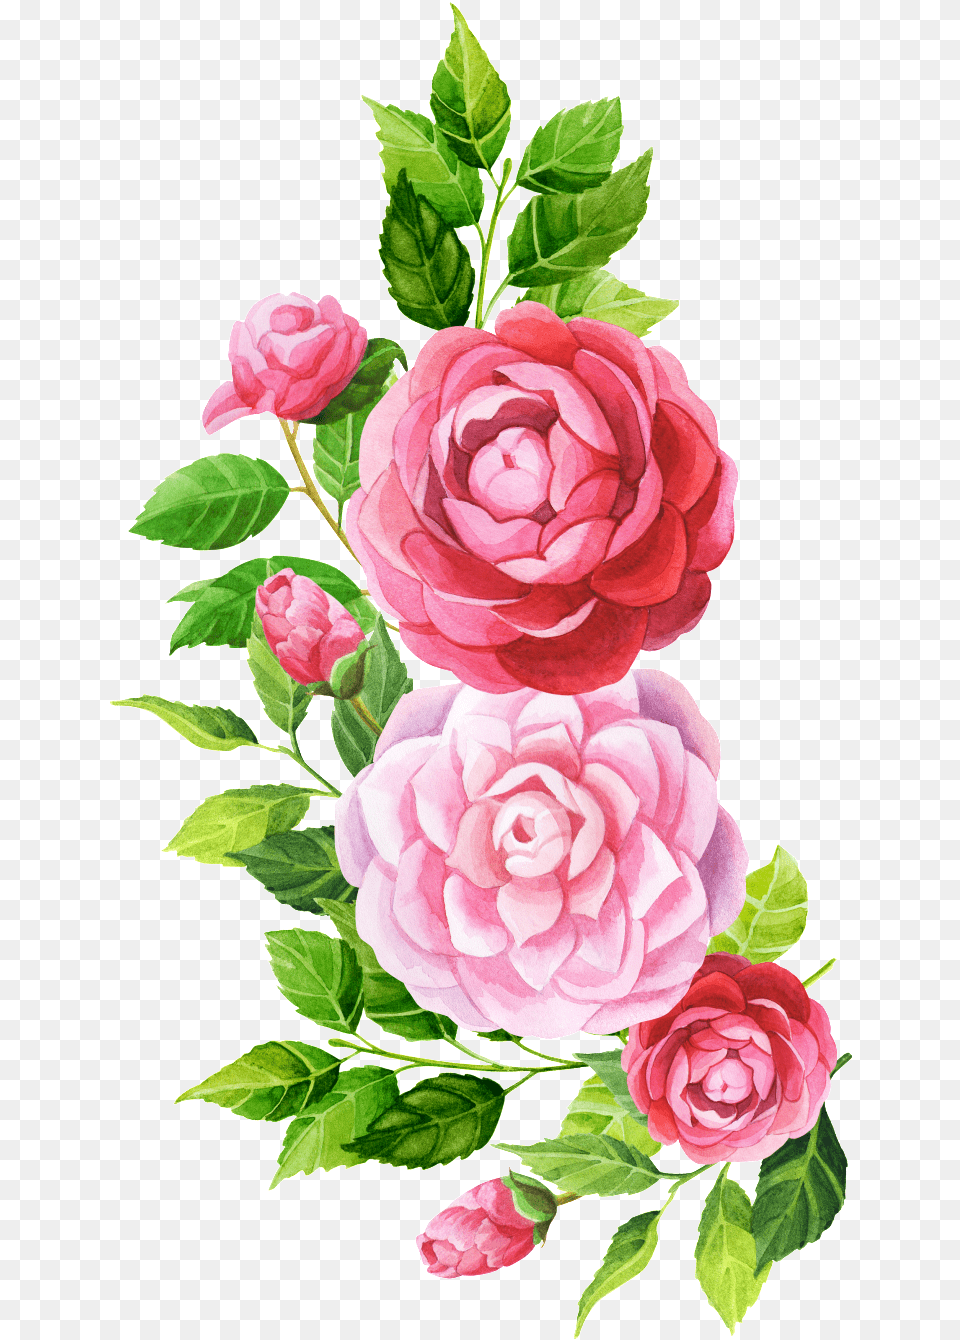 Hand Painted Pink Flower Transparent Hand Painted Flower, Plant, Rose, Flower Arrangement, Flower Bouquet Png